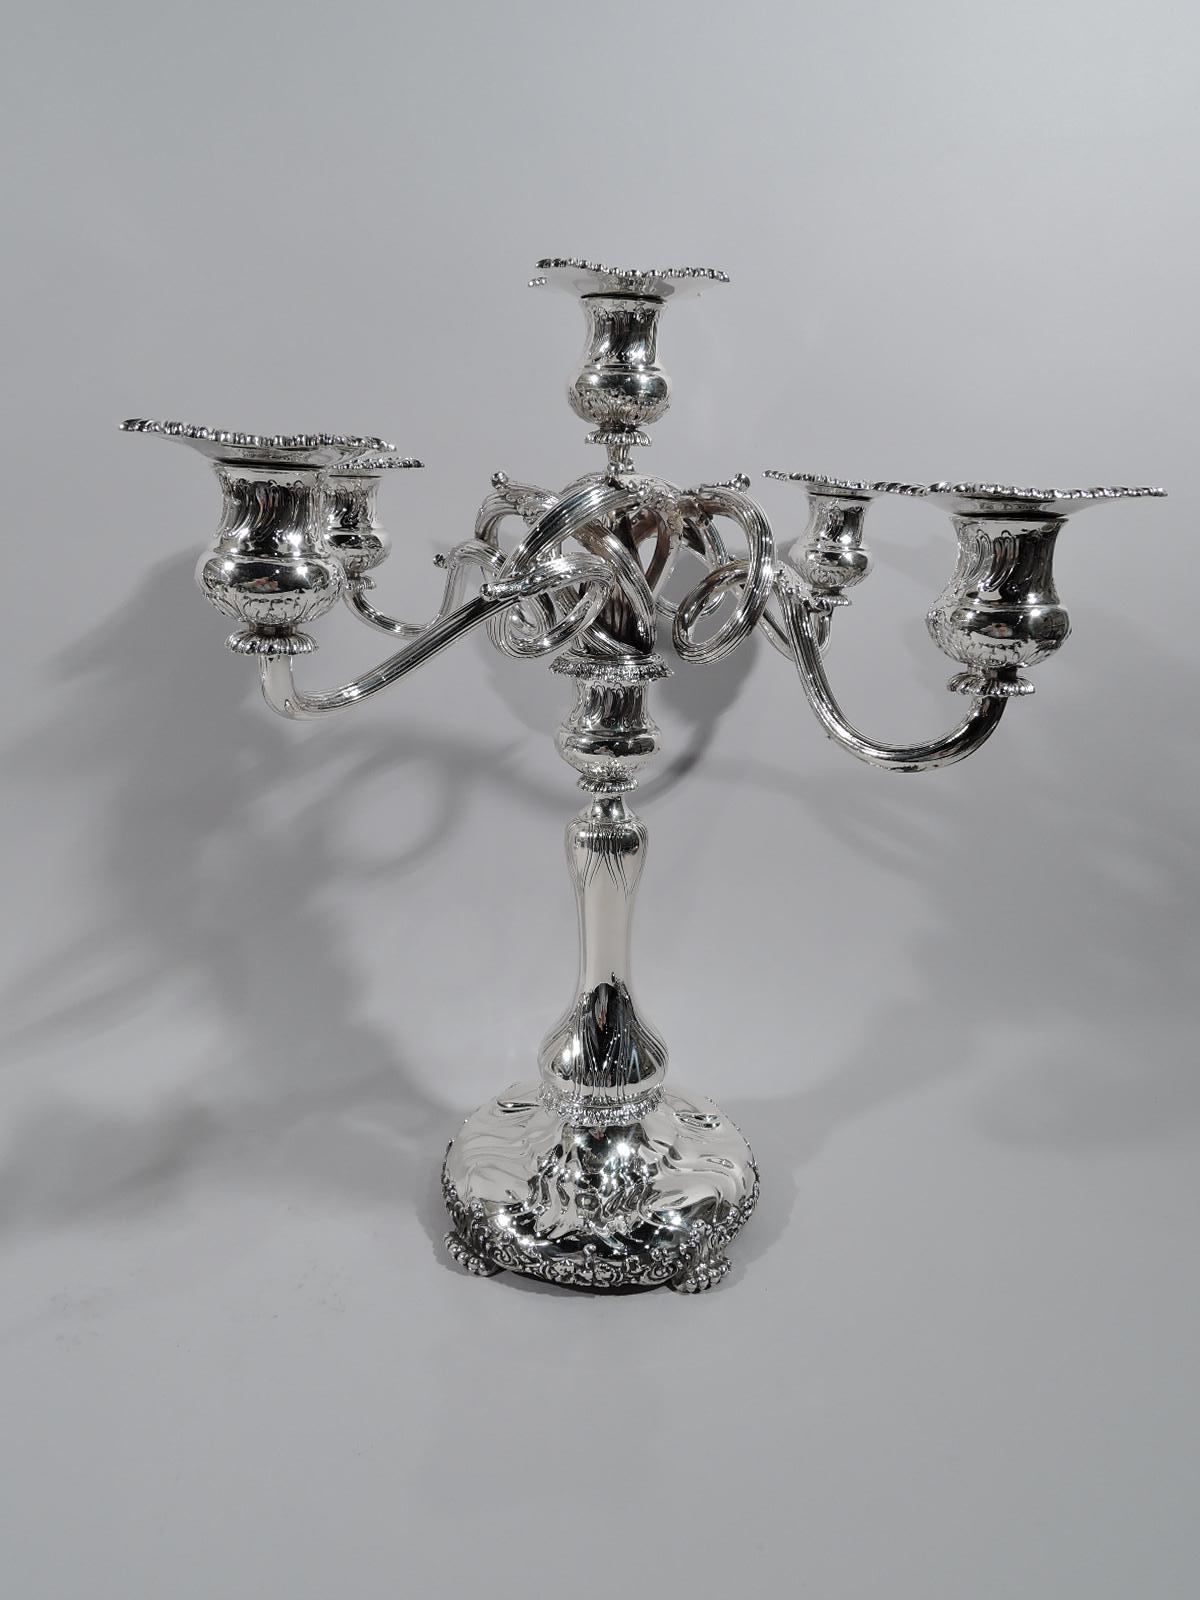 Pair of turn-of-the-century sterling silver 5-light candelabra. Made by Tiffany & Co. in New York.

Each: Urn socket on baluster shaft on wide and round raised base supported by 4 leaf-mounted paw supports. Detachable branches comprising ribbed